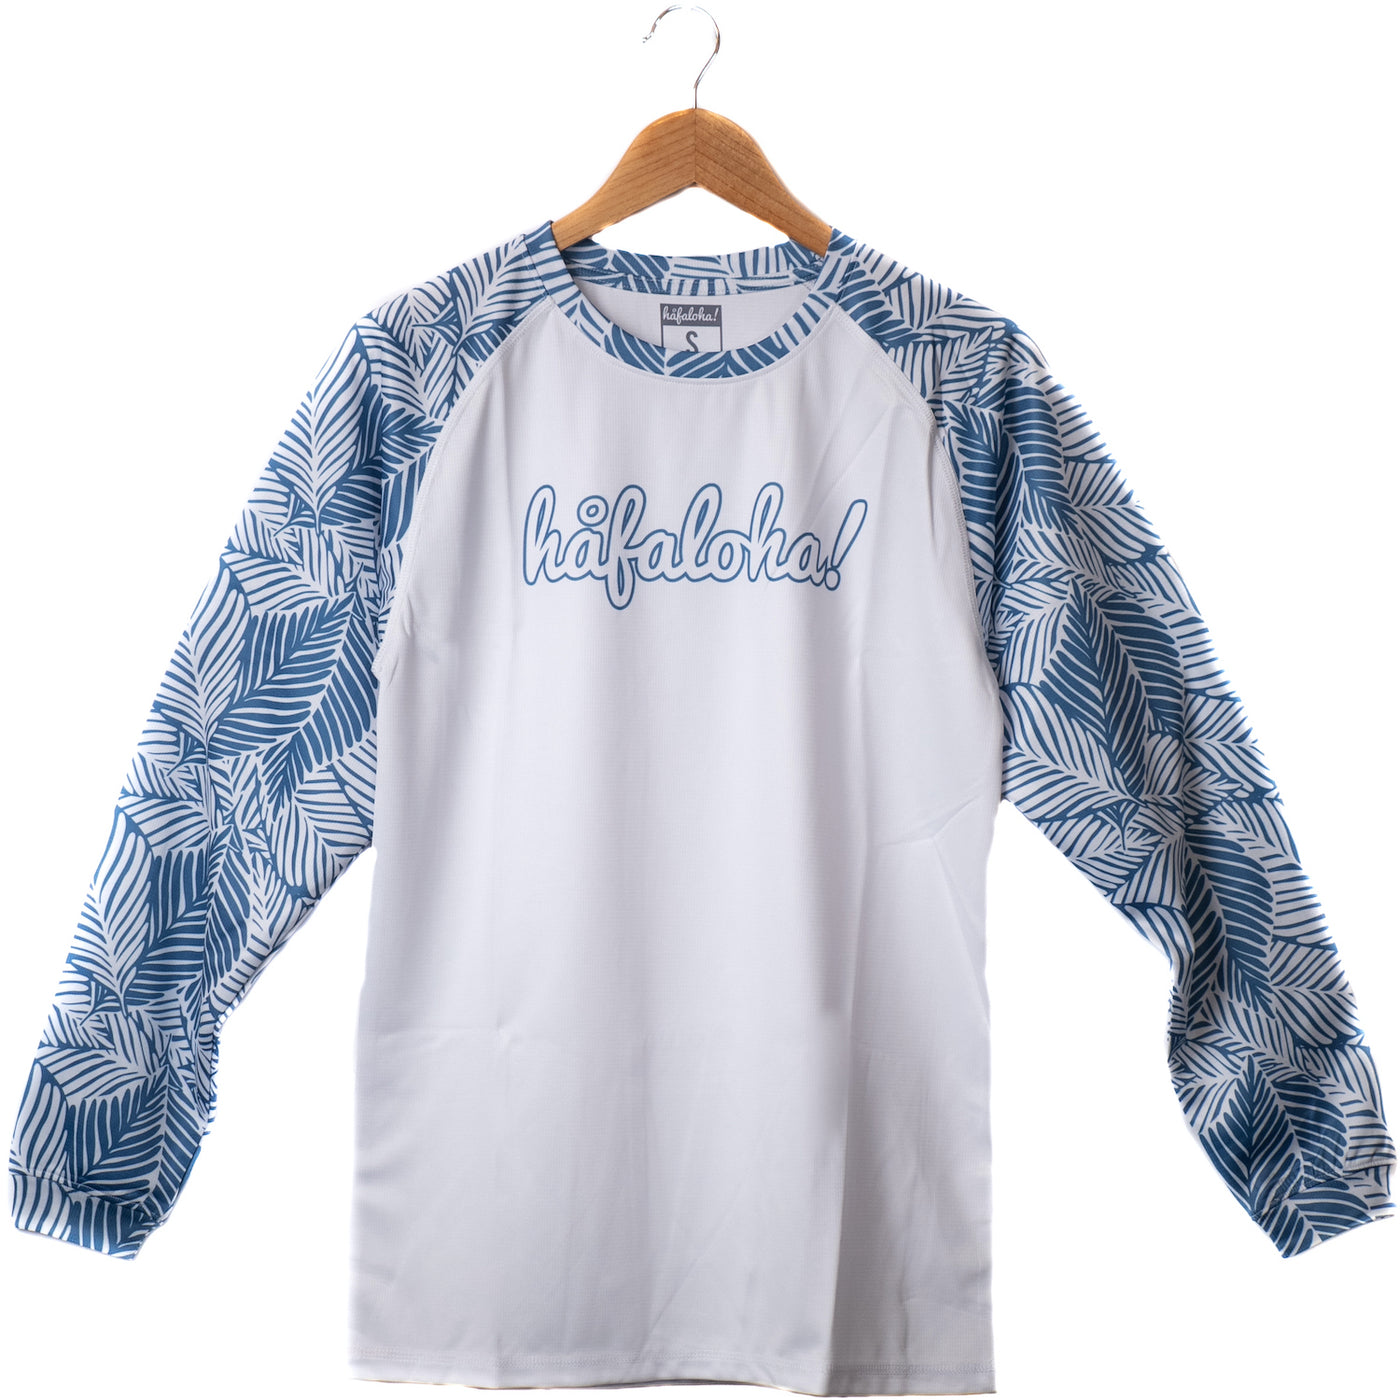 "Nature Calls" design, White long-sleeve, front